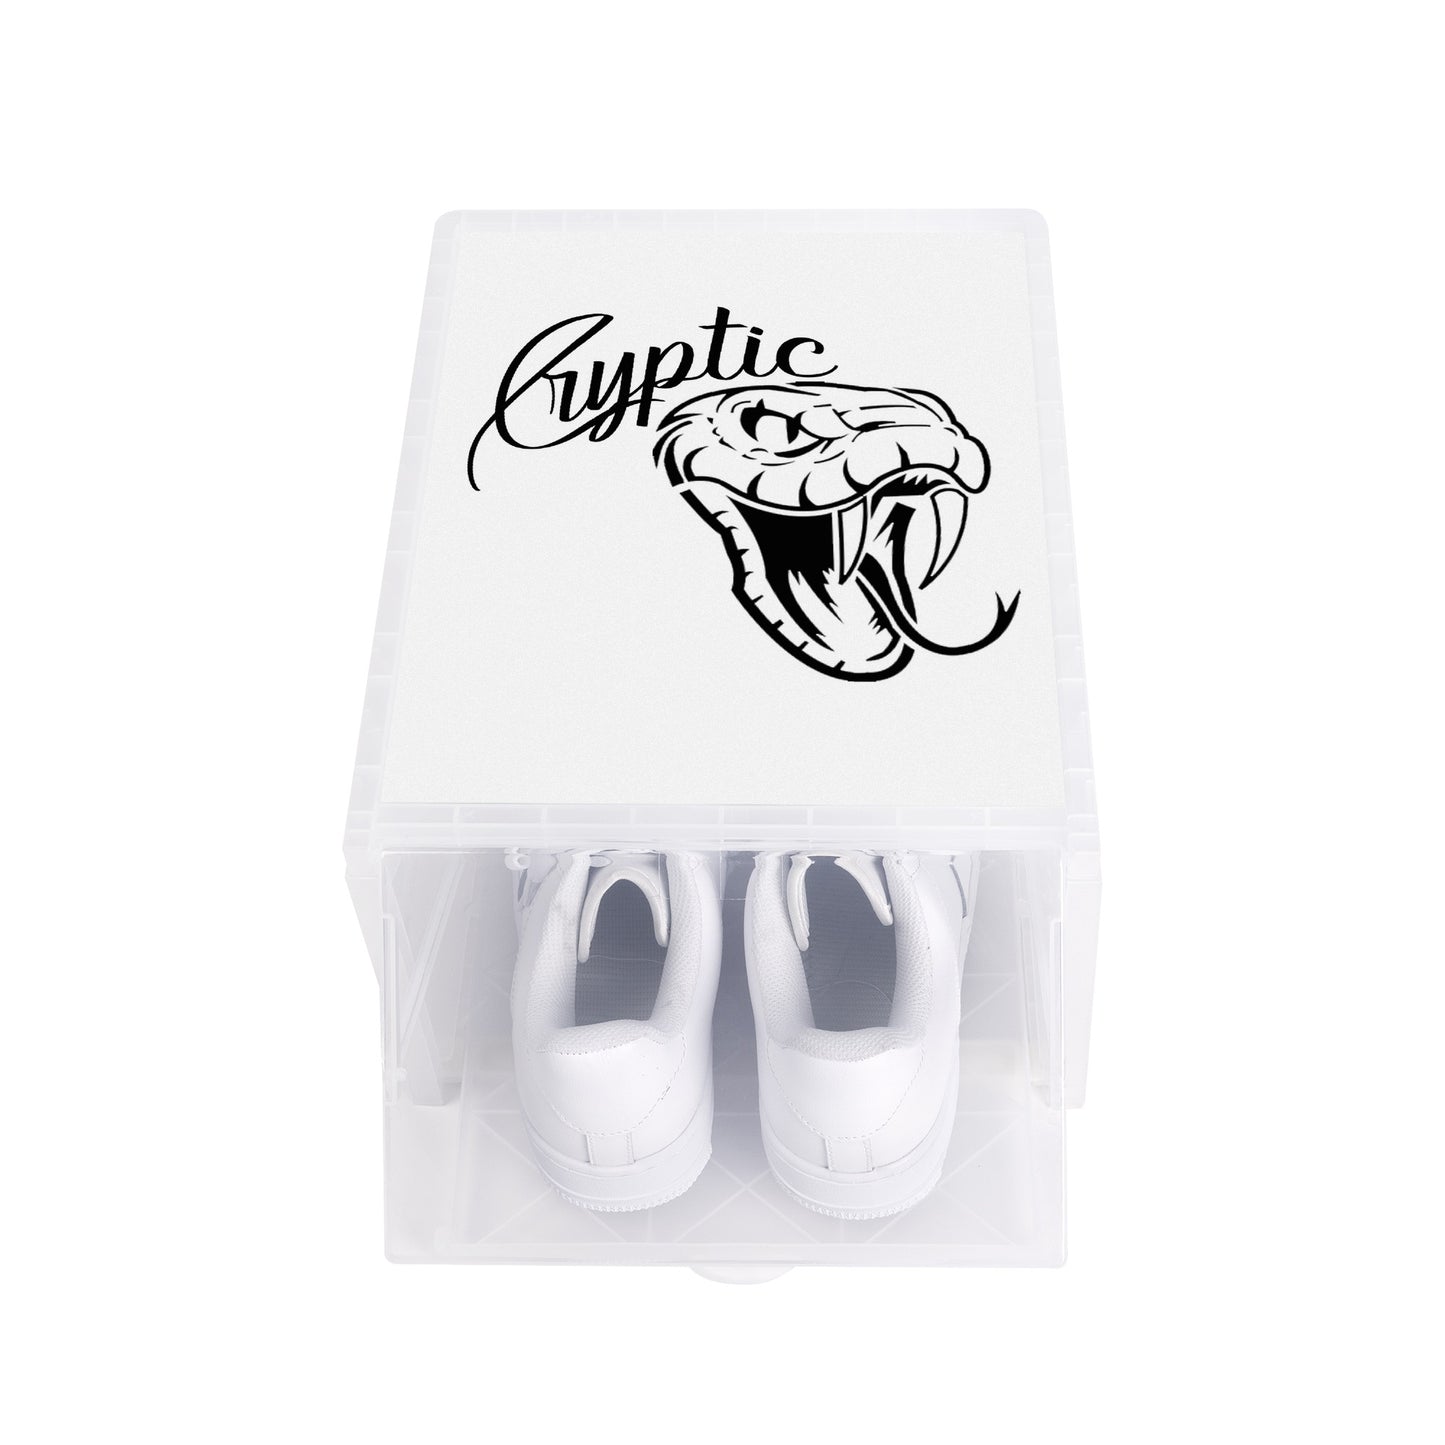 Cryptic 3-Sided Printed Shoe Box